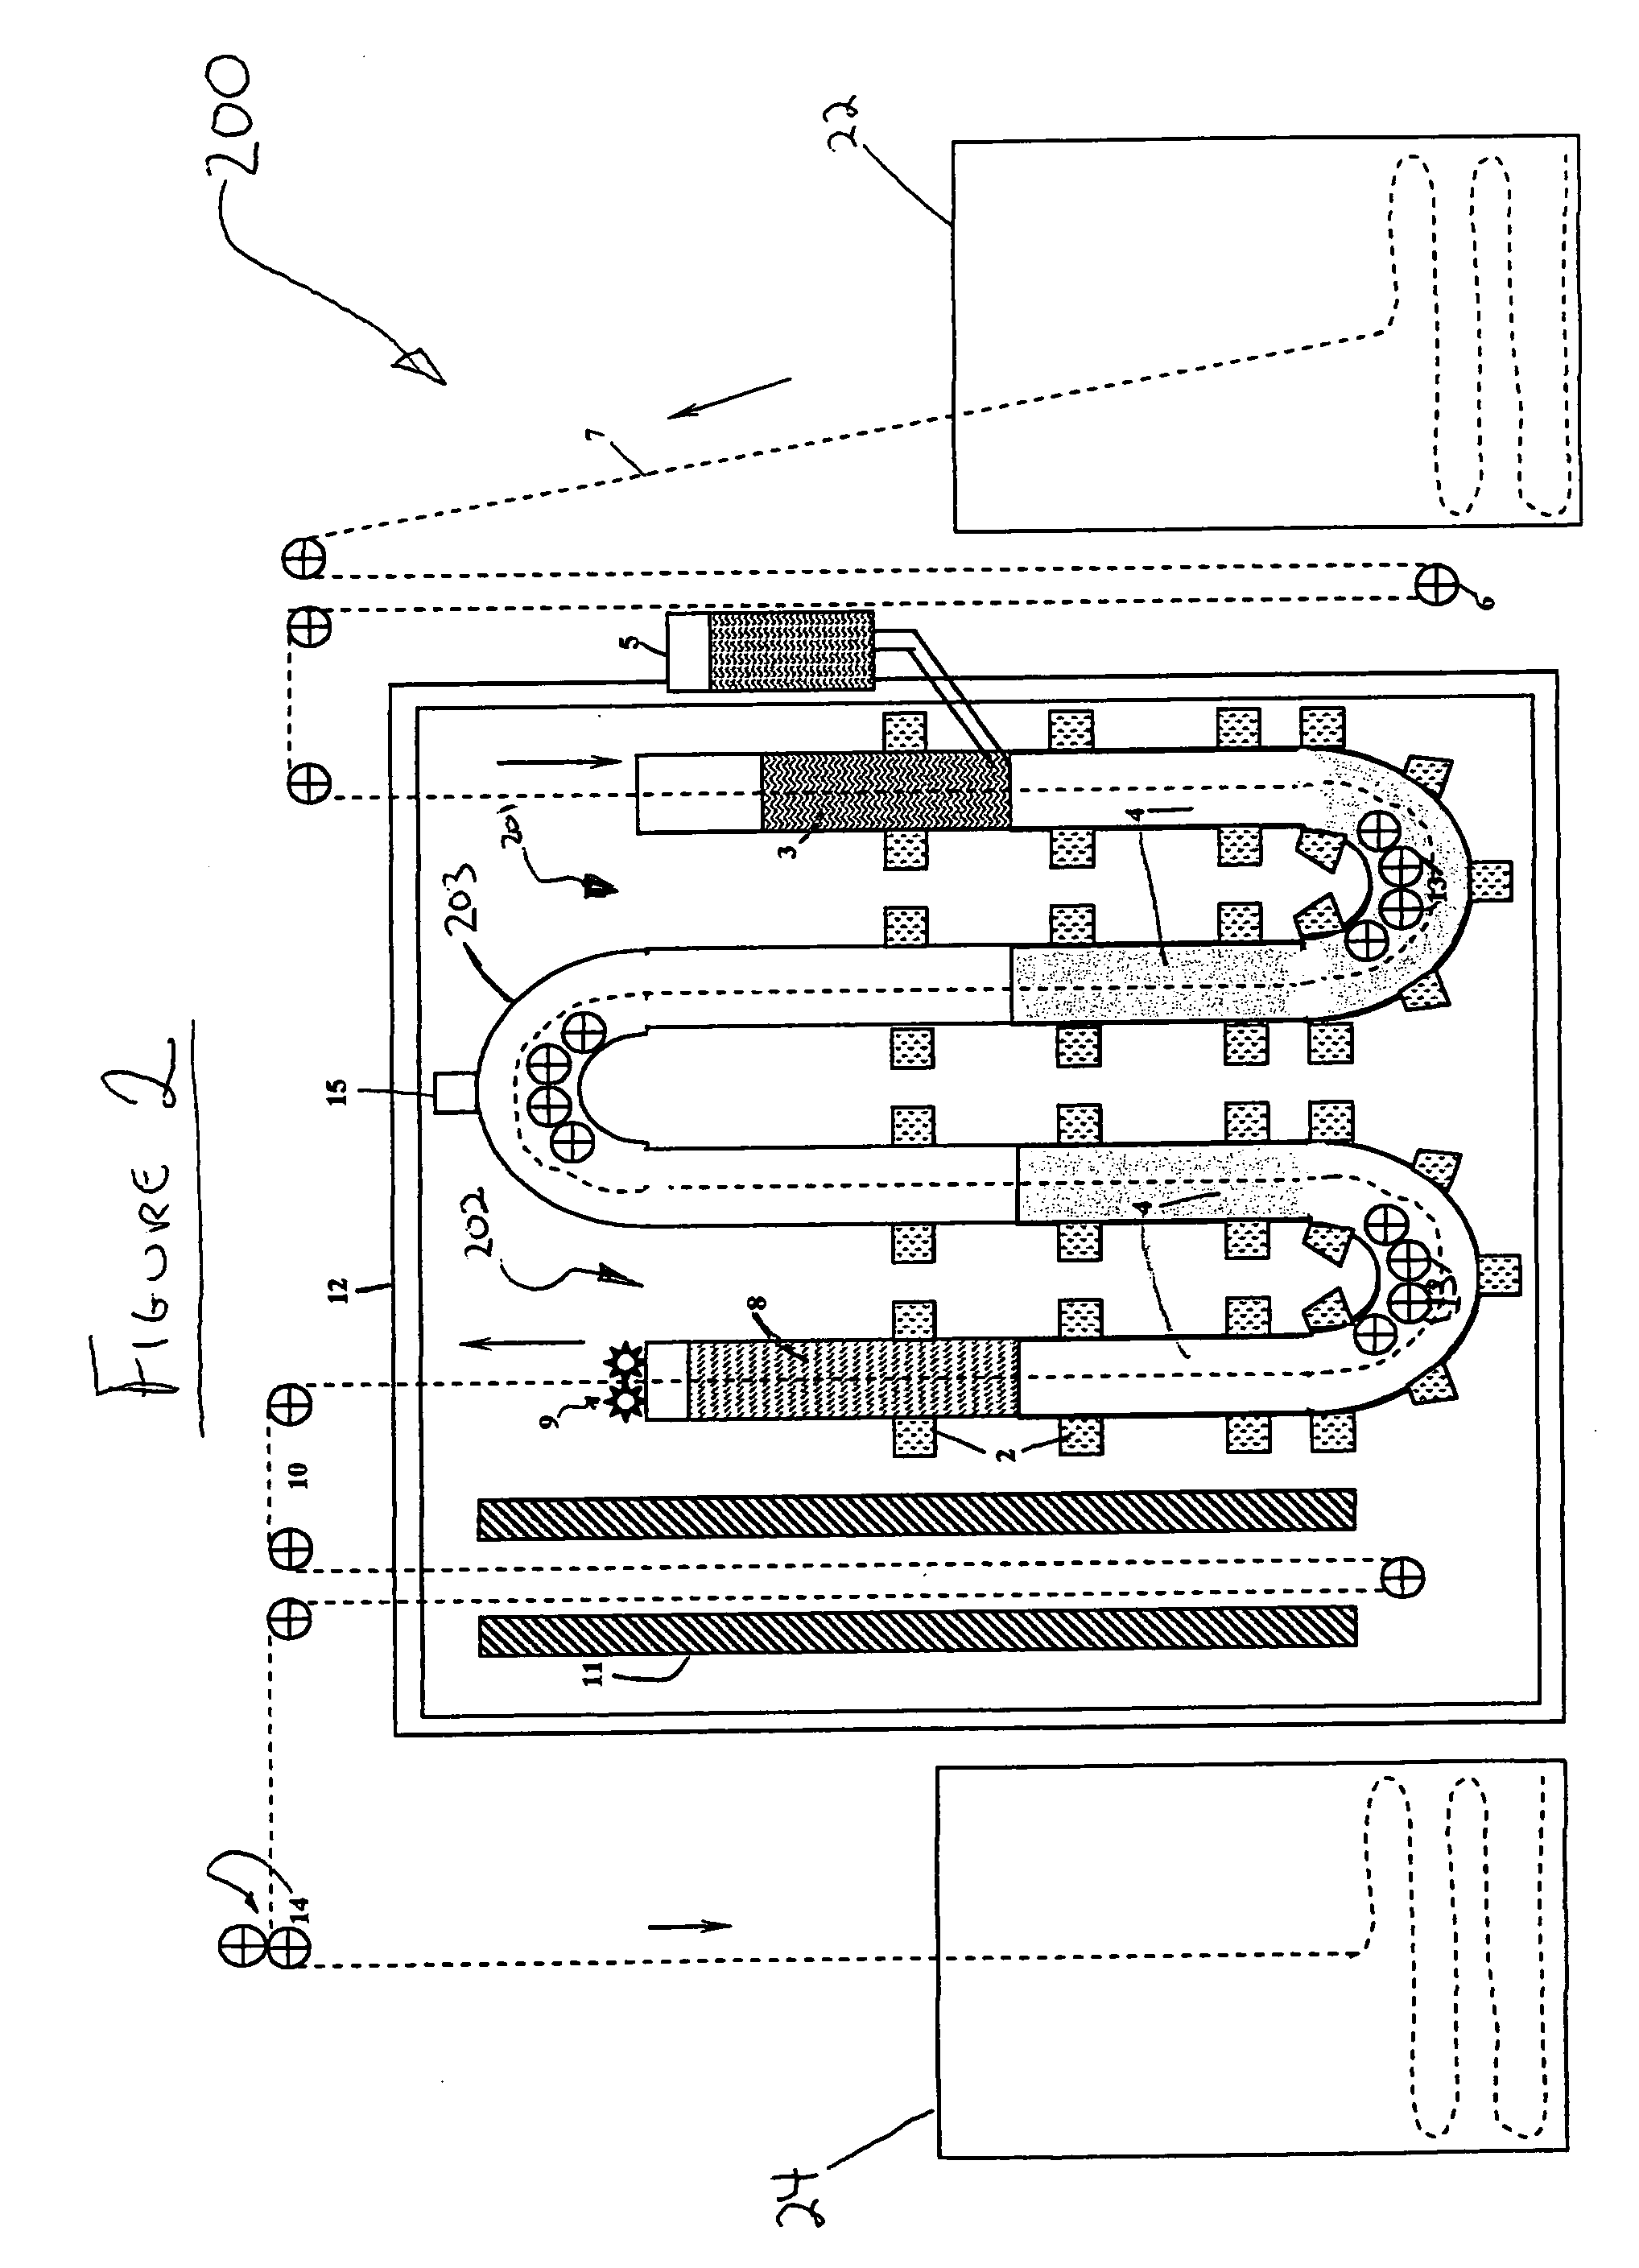 Dyeing apparatus and method therefor